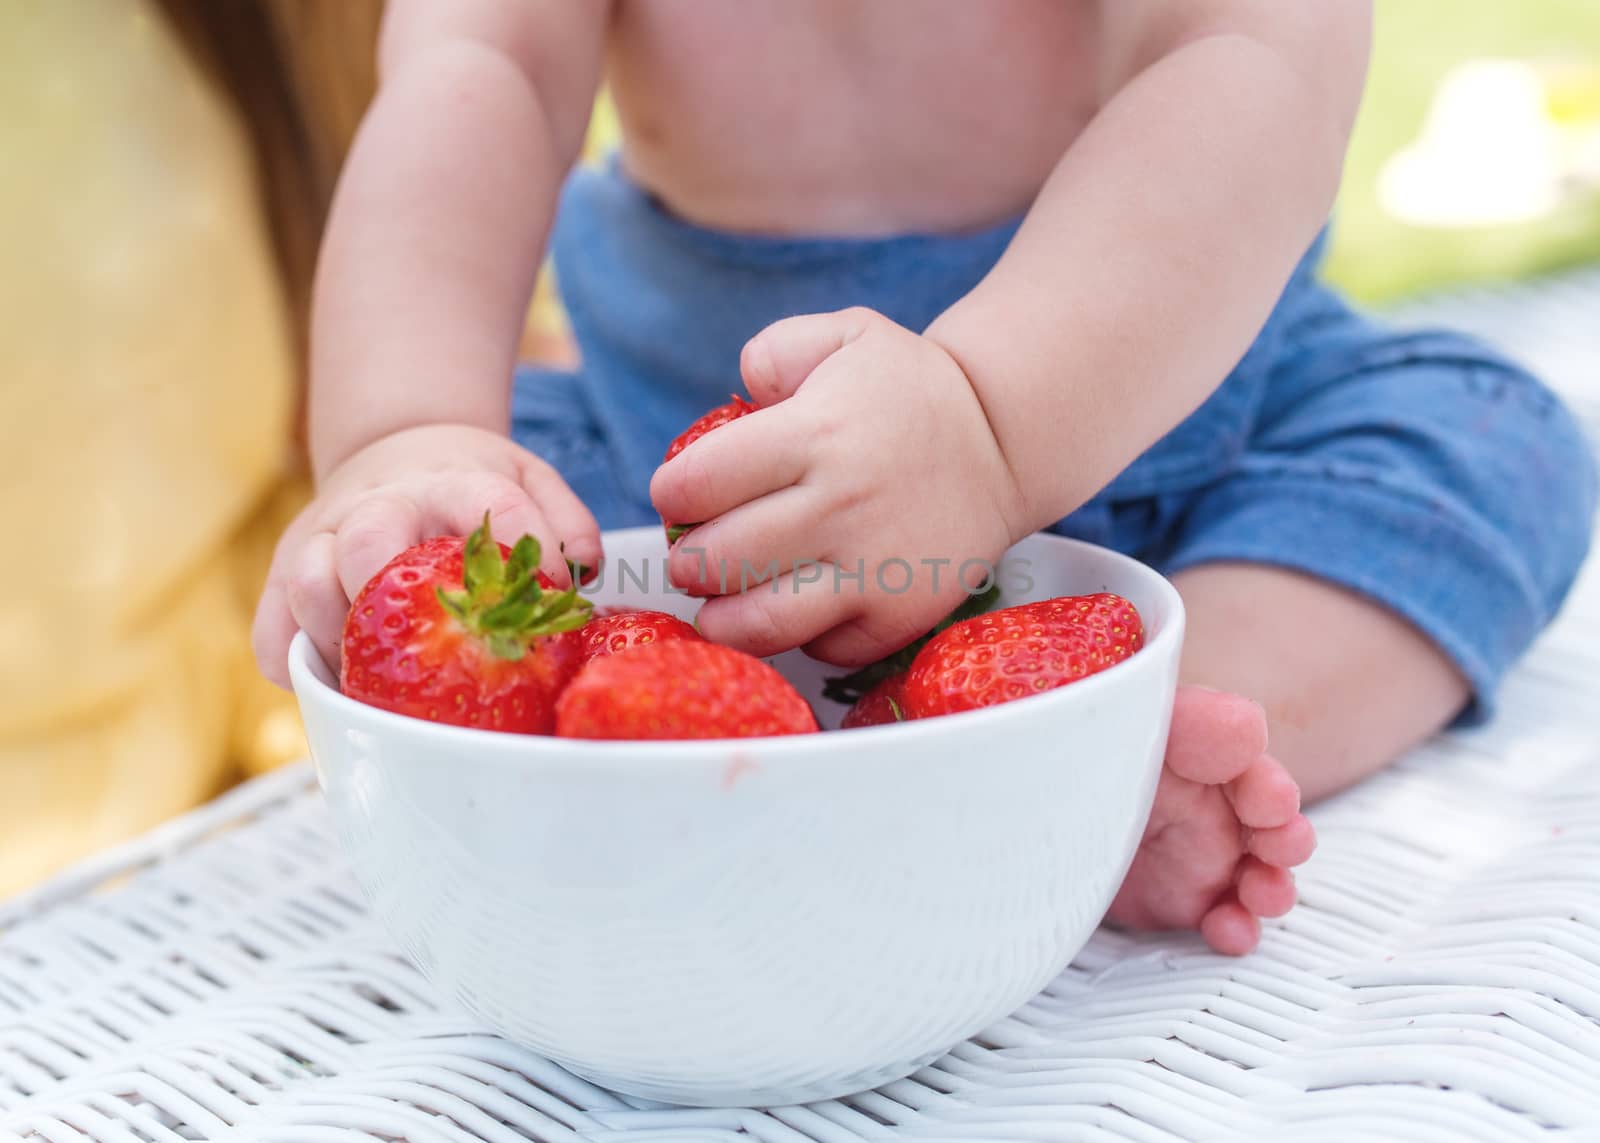 a child grabbing strawberries from a bowl by Iryna_Melnyk